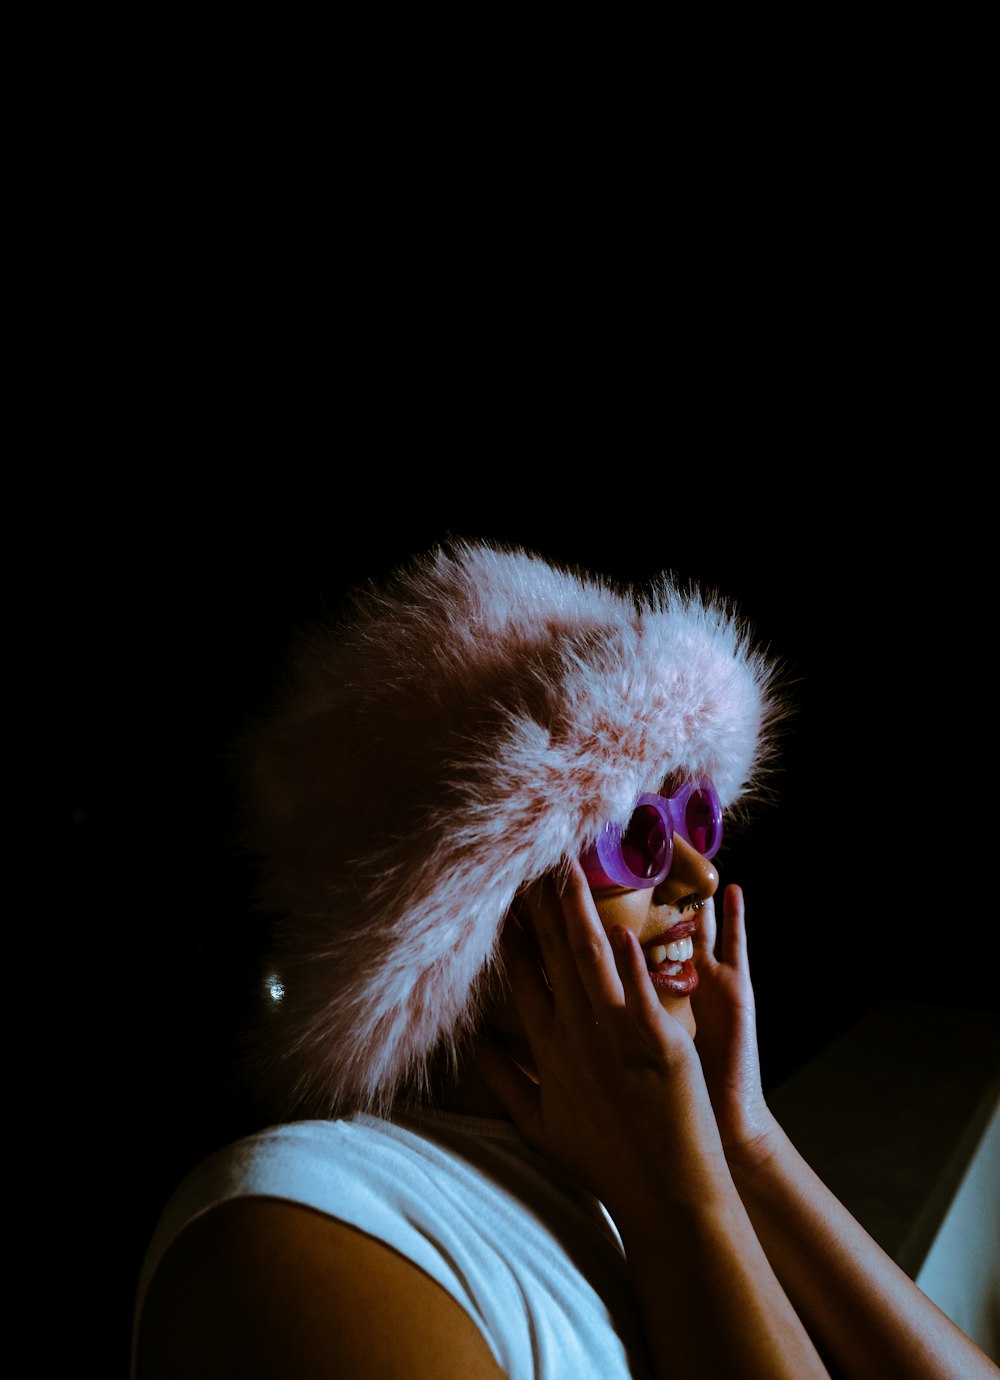 a woman wearing a fur hat and sunglasses